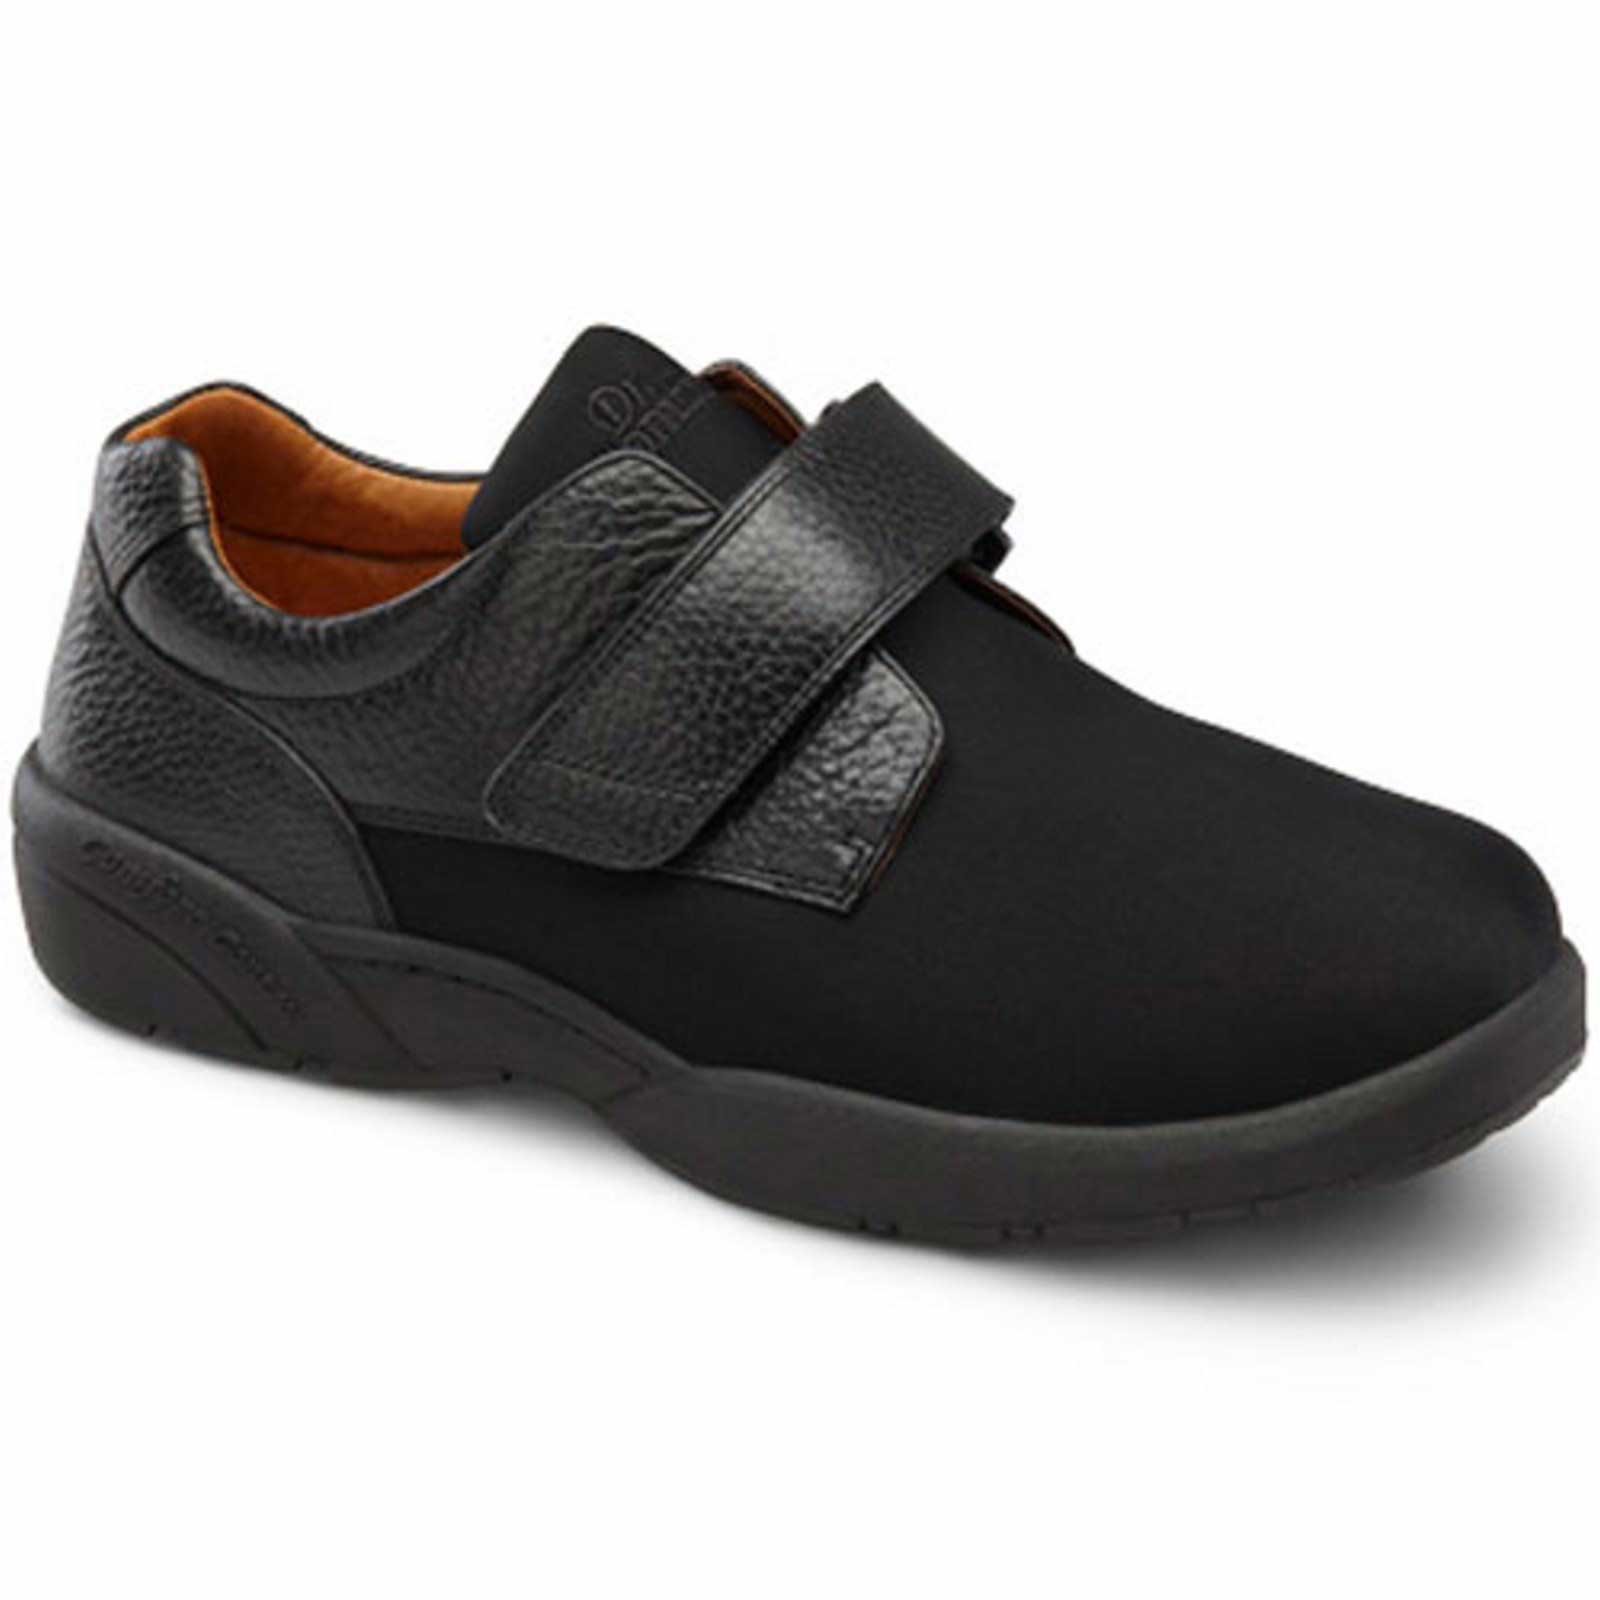 Dr. Comfort Shoes Brian-X Men's Casual & Medical Shoe - Extra Wide